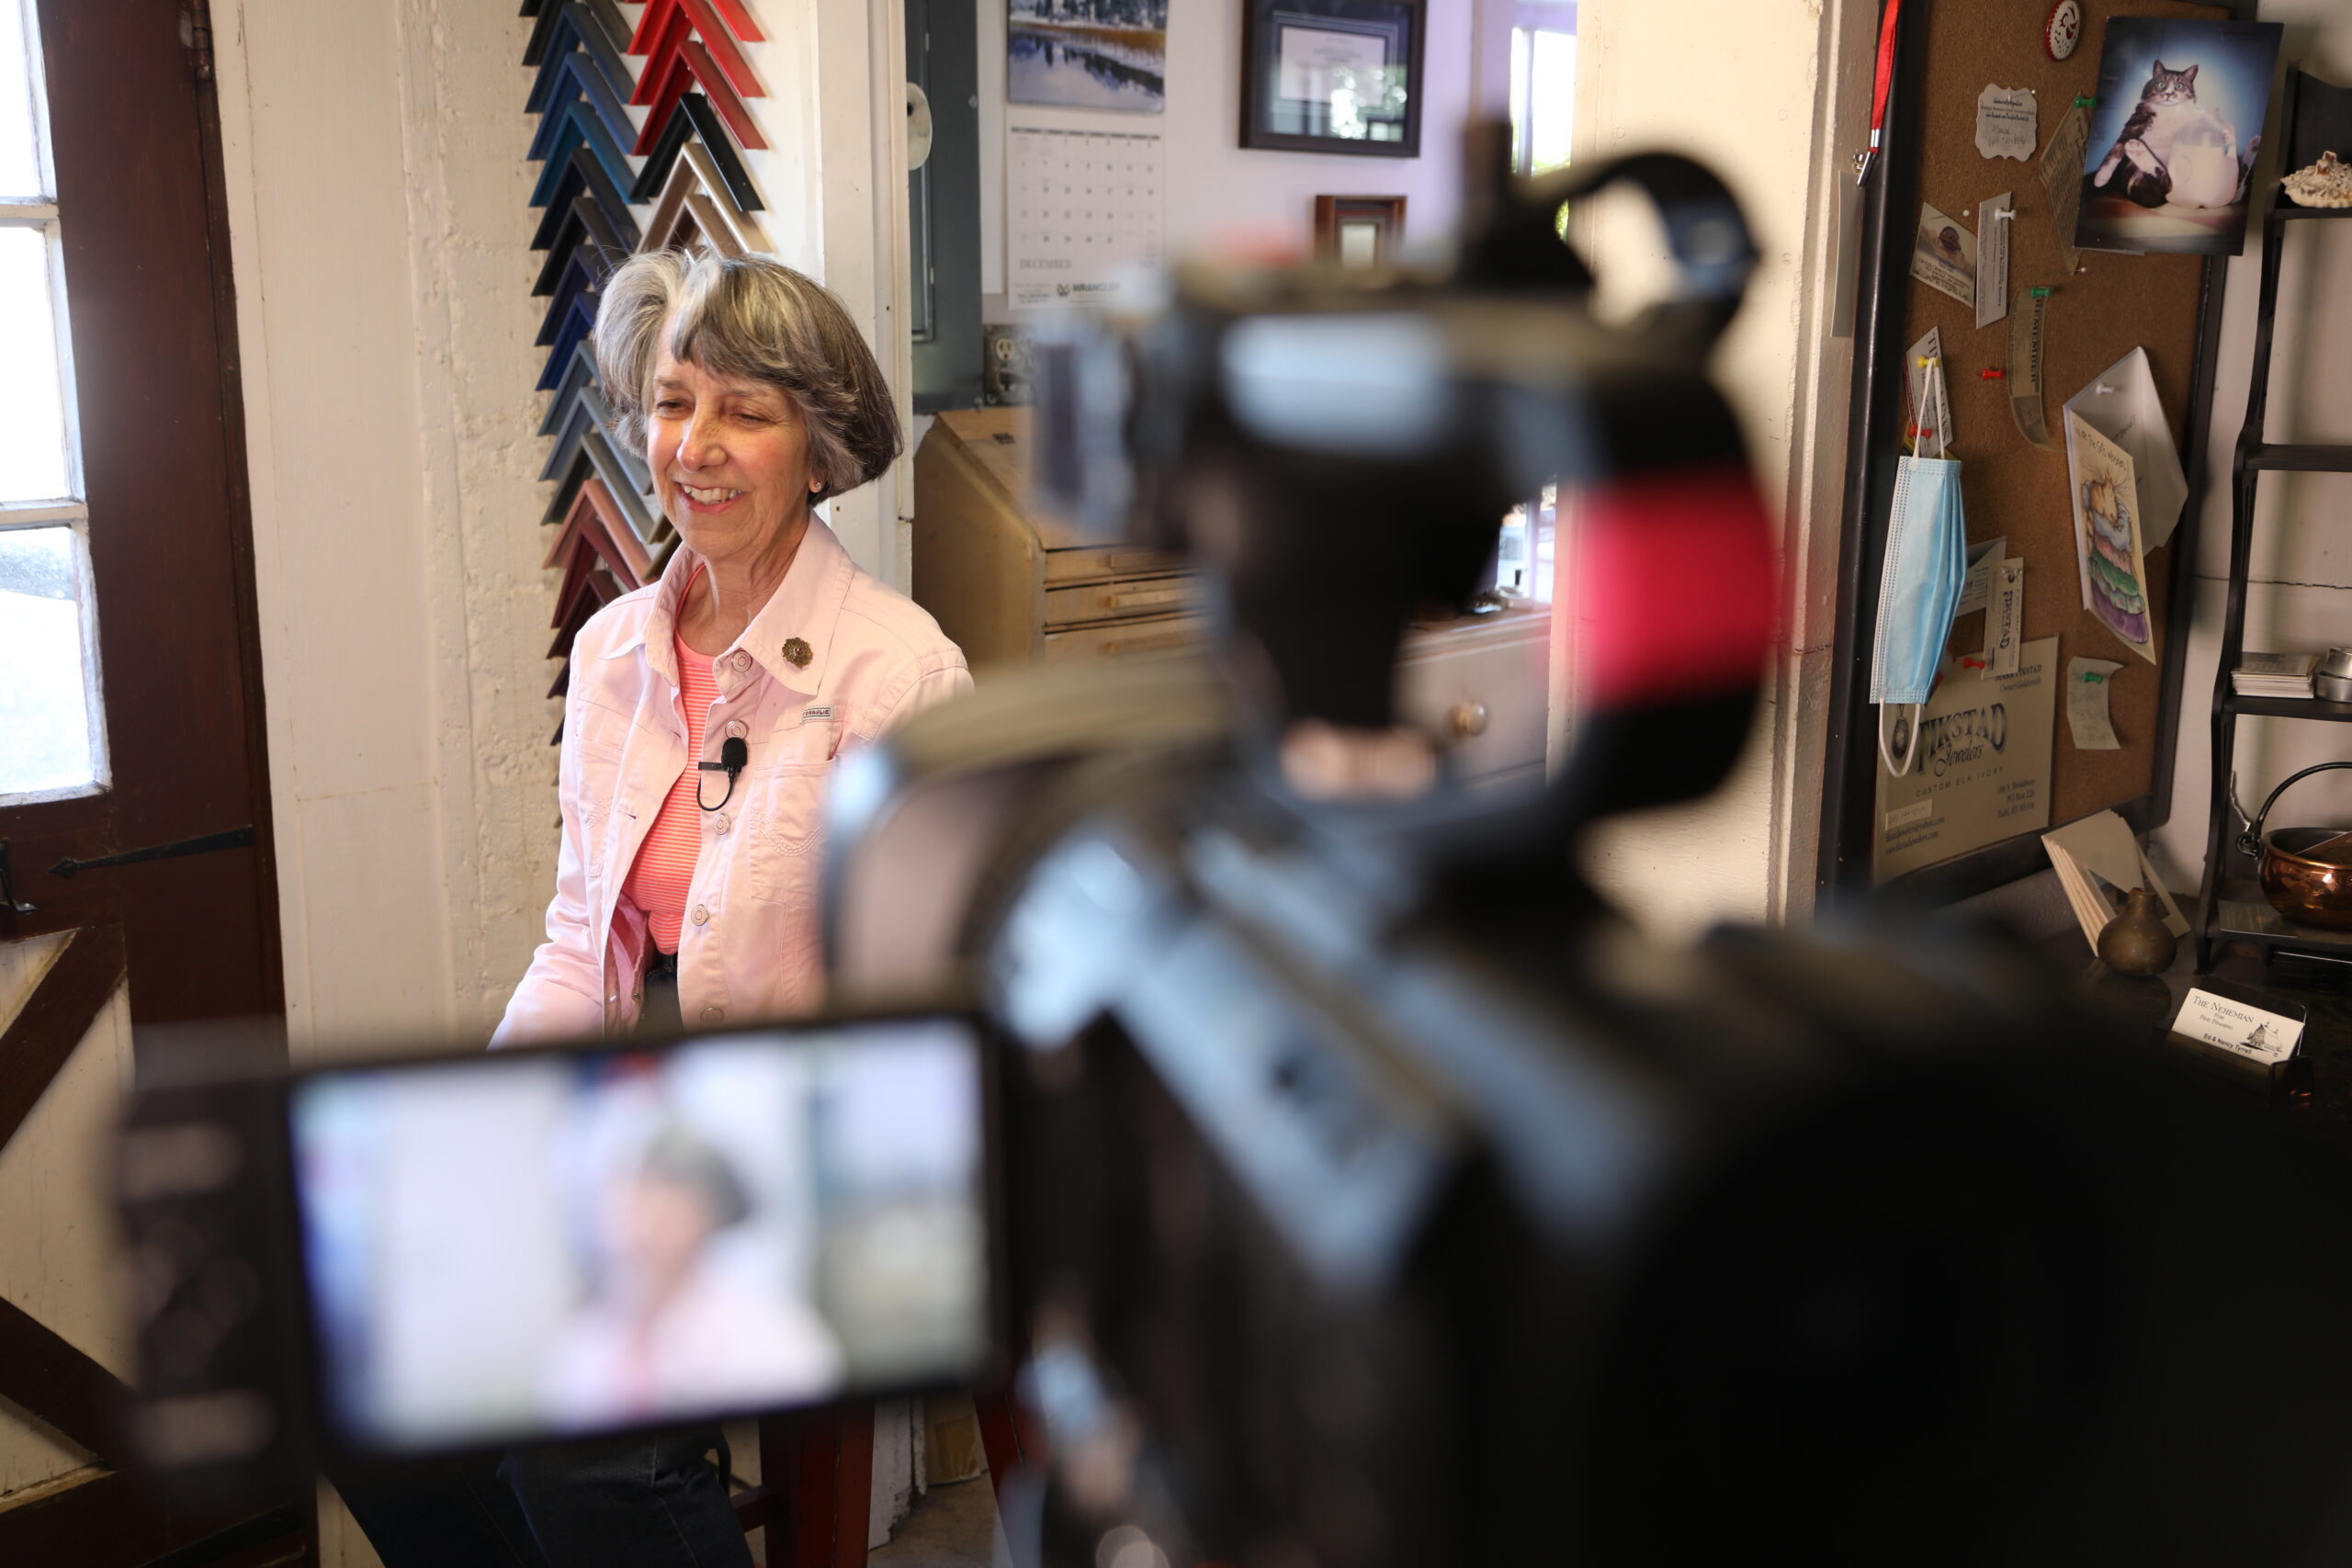 Nancy T. is smiling at the camera while being interviewed by ISBDC South Central Regional Director, Bryan Matsuoka